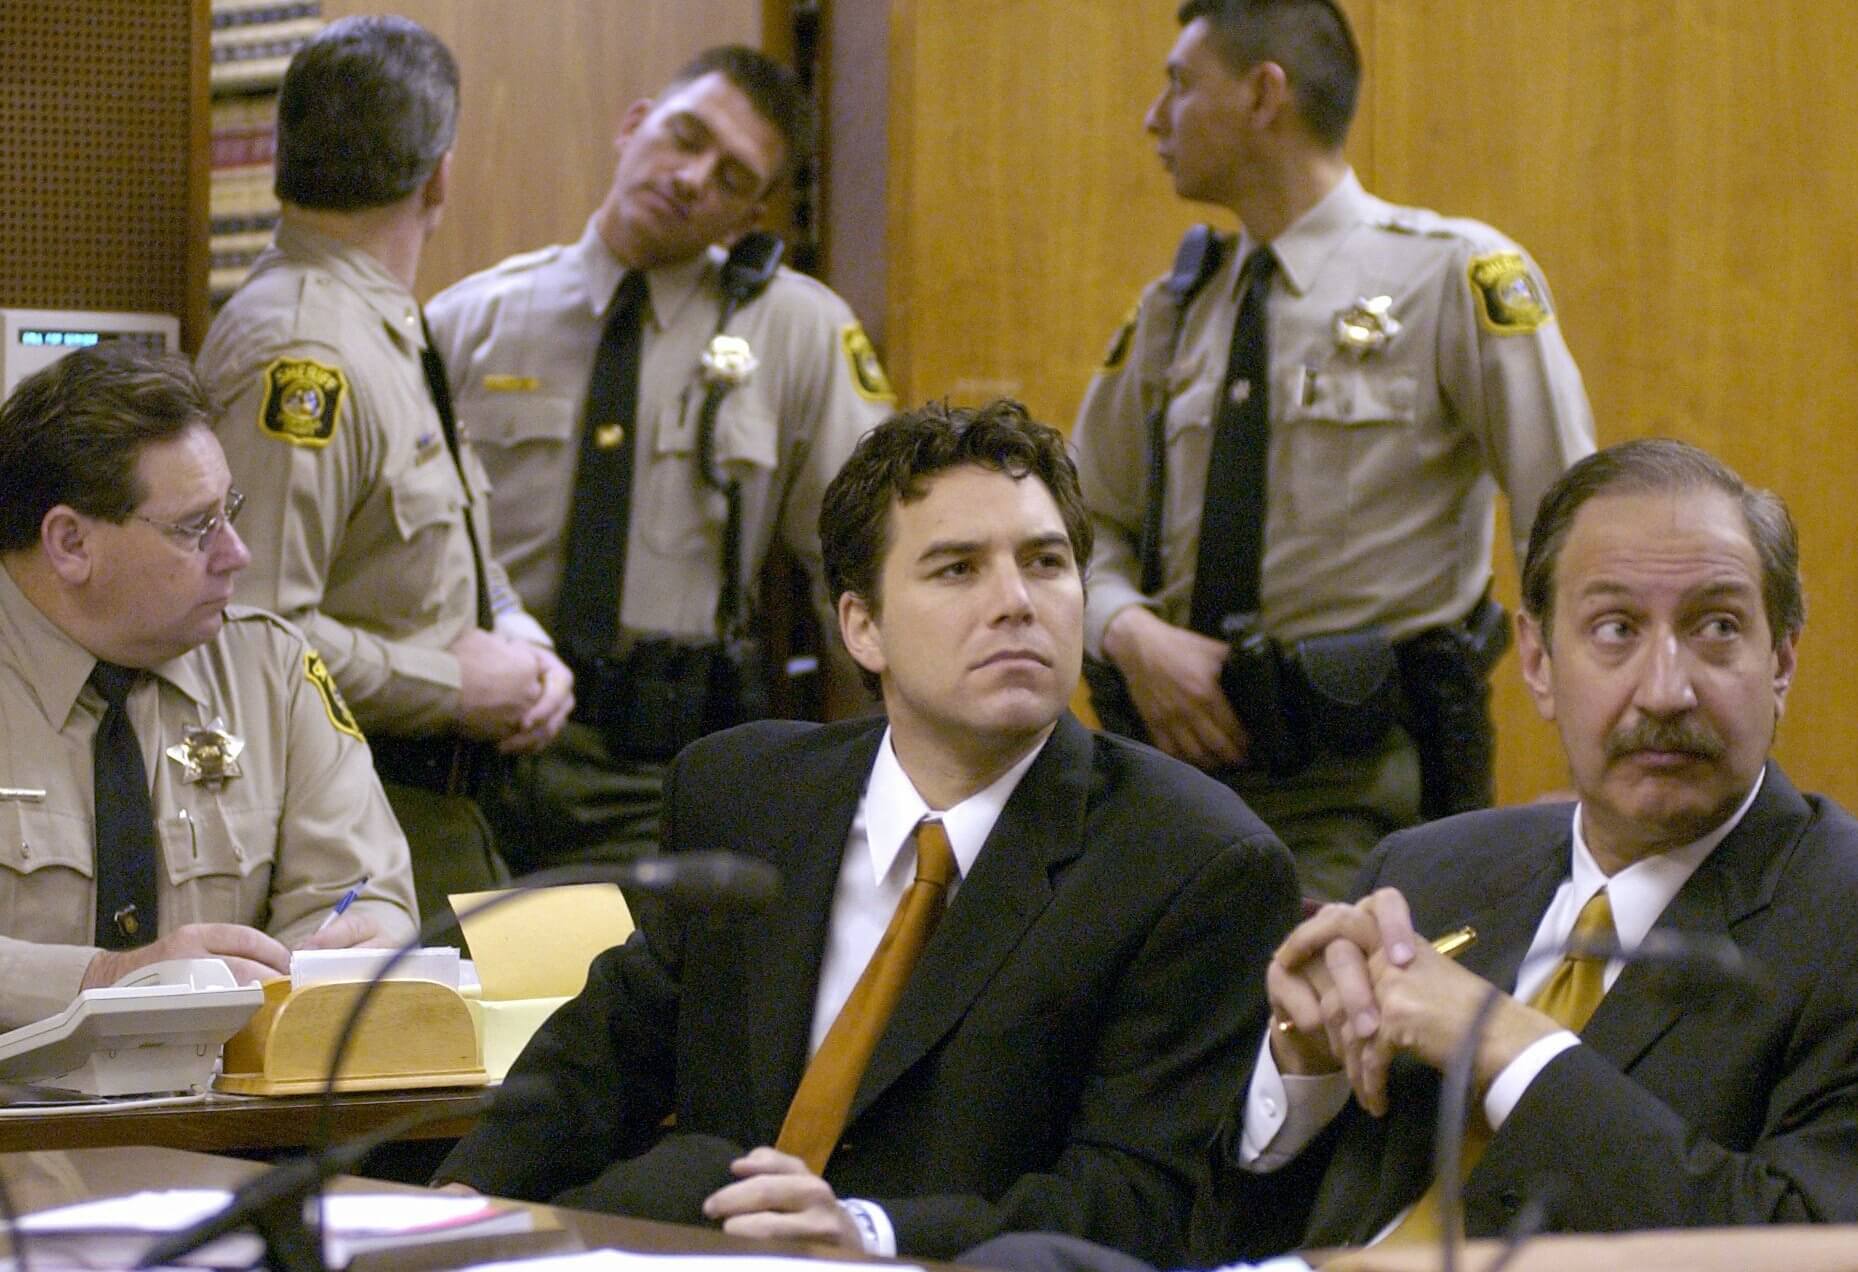 Revisiting the Scott Peterson case 20 years later